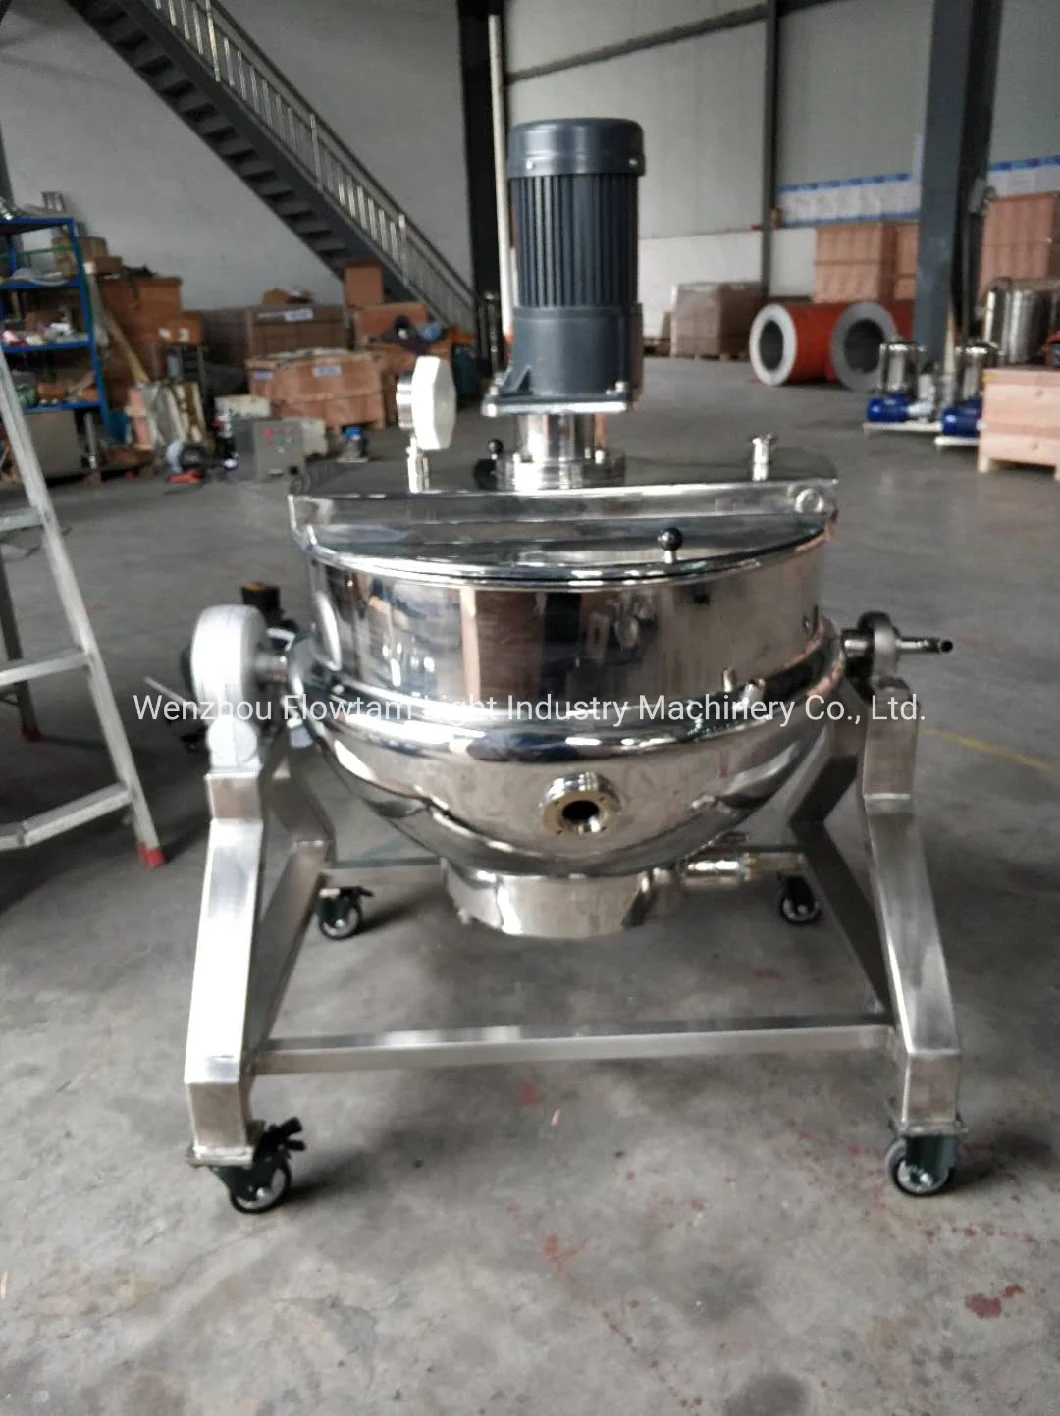 Stainless Steel Cooking Jacket Kettle with Mixer